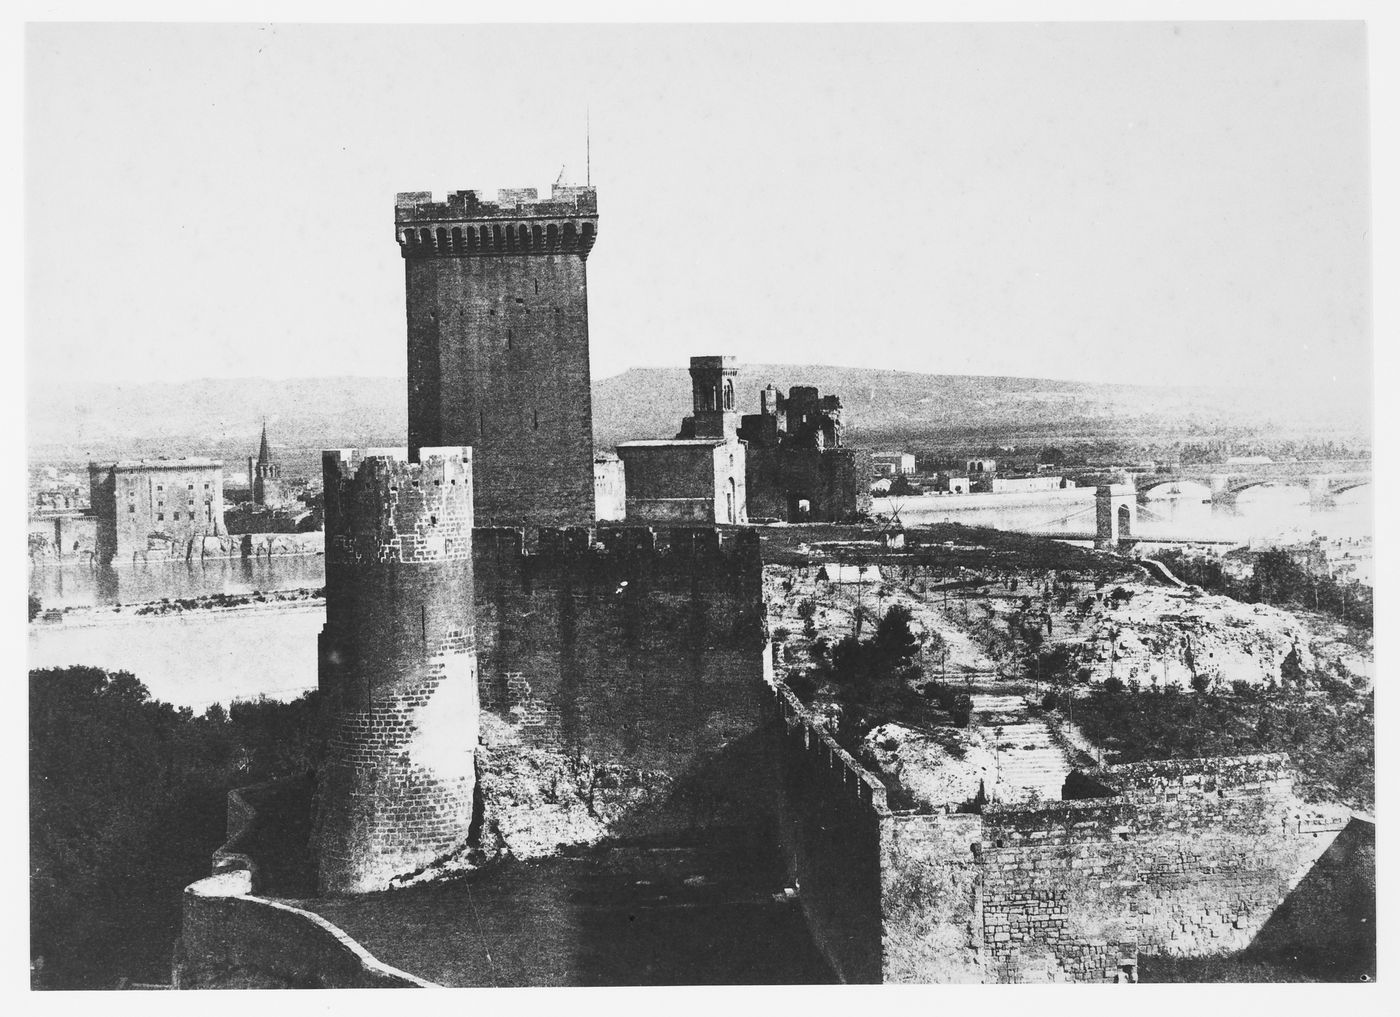 View of a castle or fortress, Tarascon, France